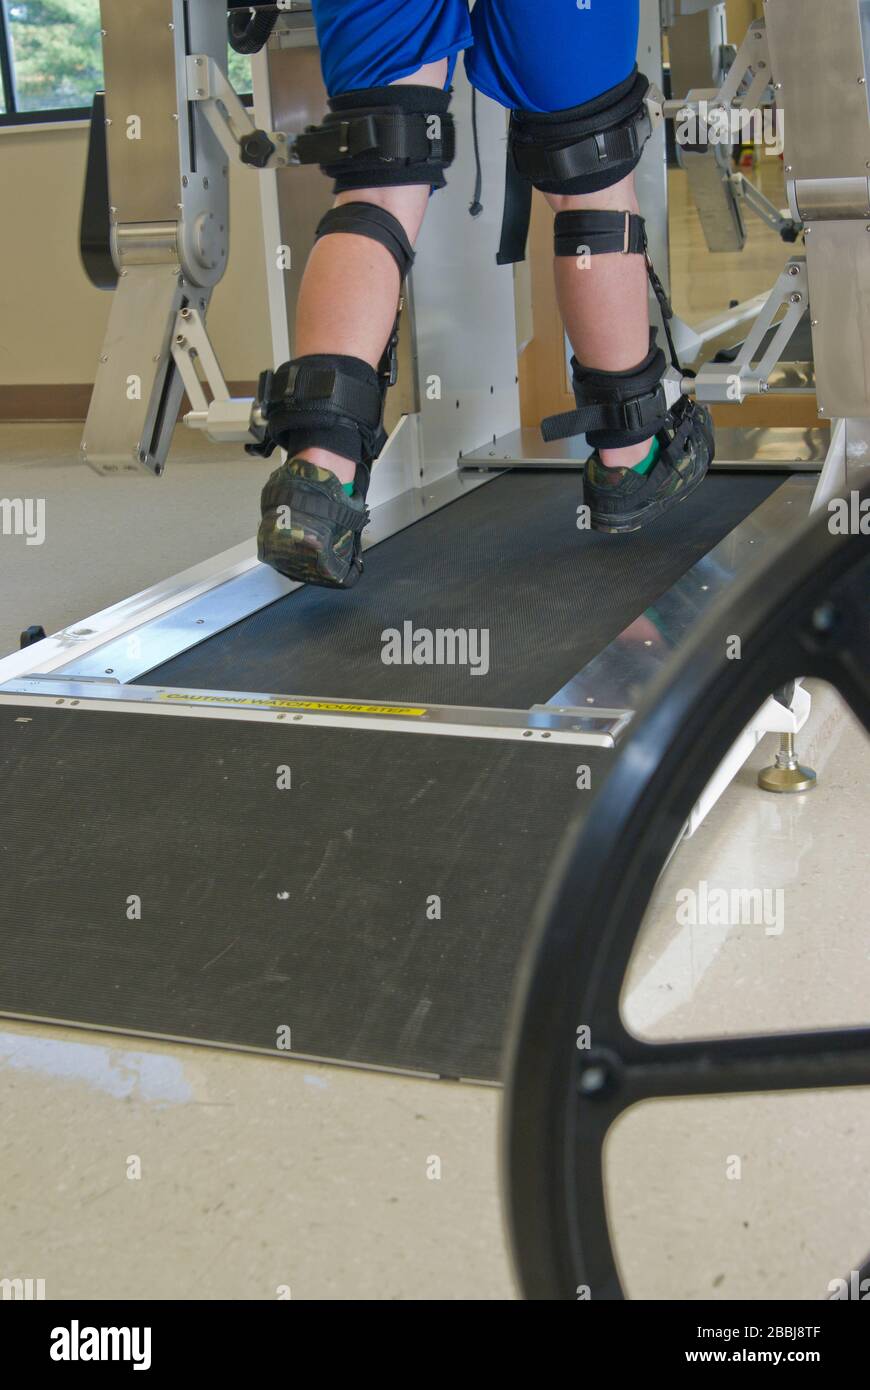 Partial view of a man in physical therapy on a machine that assists paralyzed legs into walking motion Stock Photo